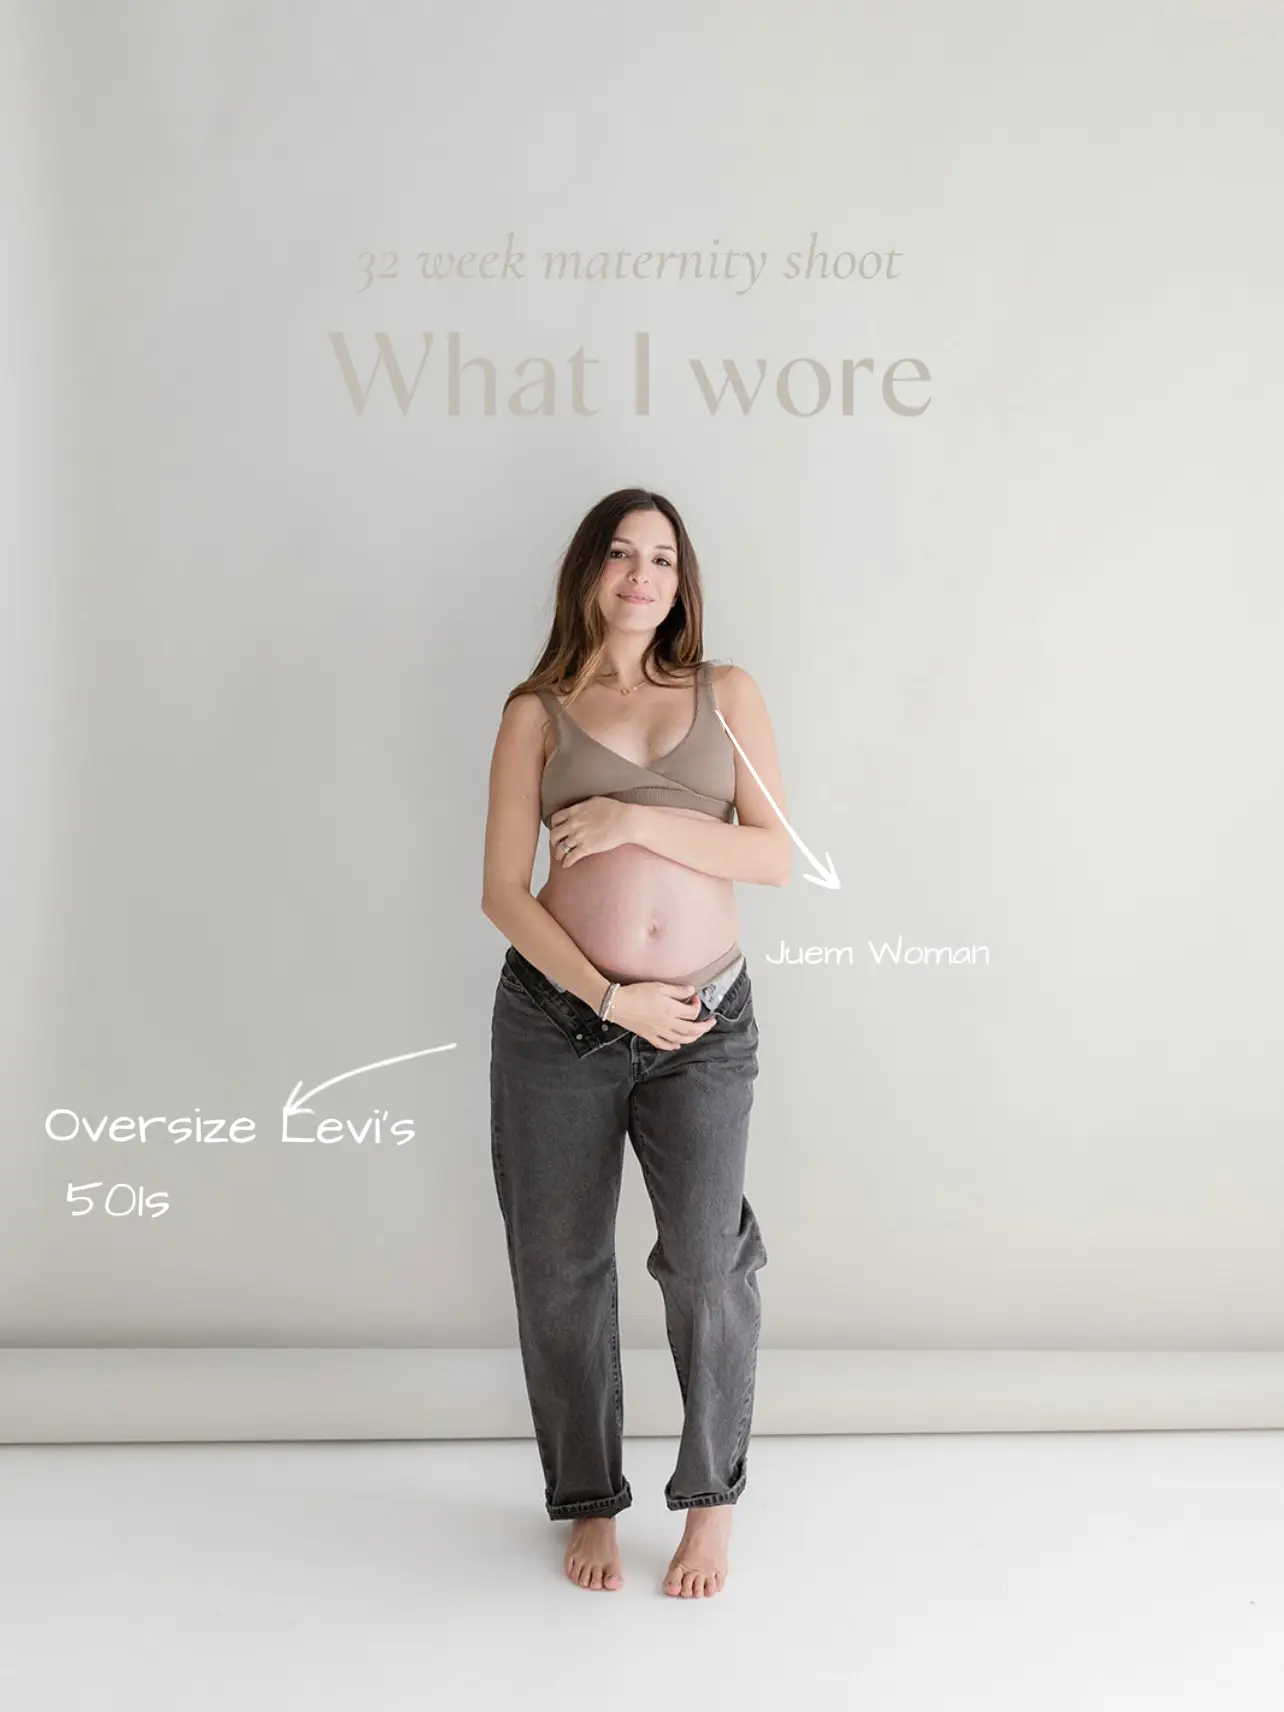 32 week maternity shoot — what I wore, Gallery posted by Josefina Boneo